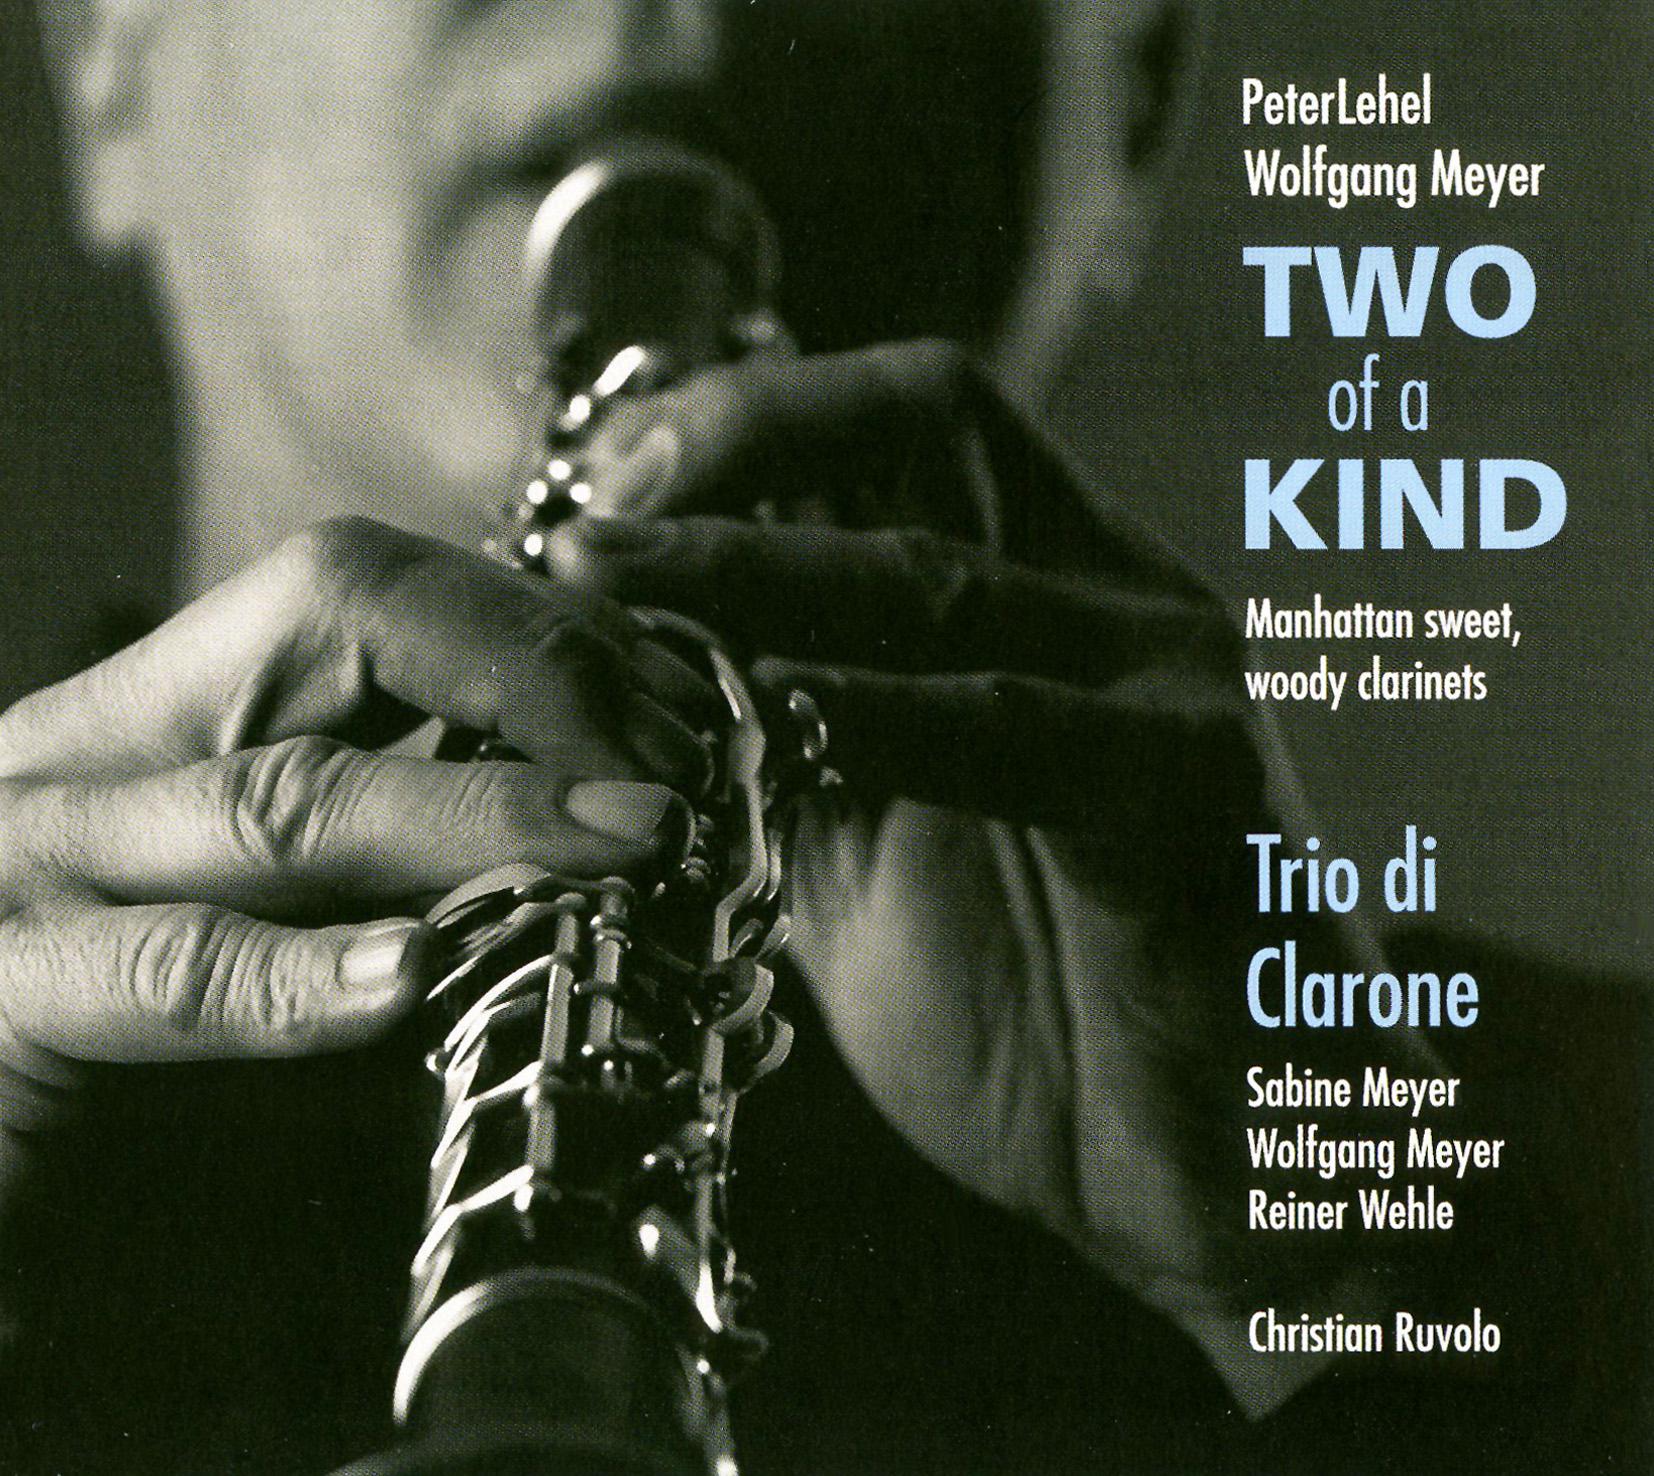 Two of a kind: No. 4. Change